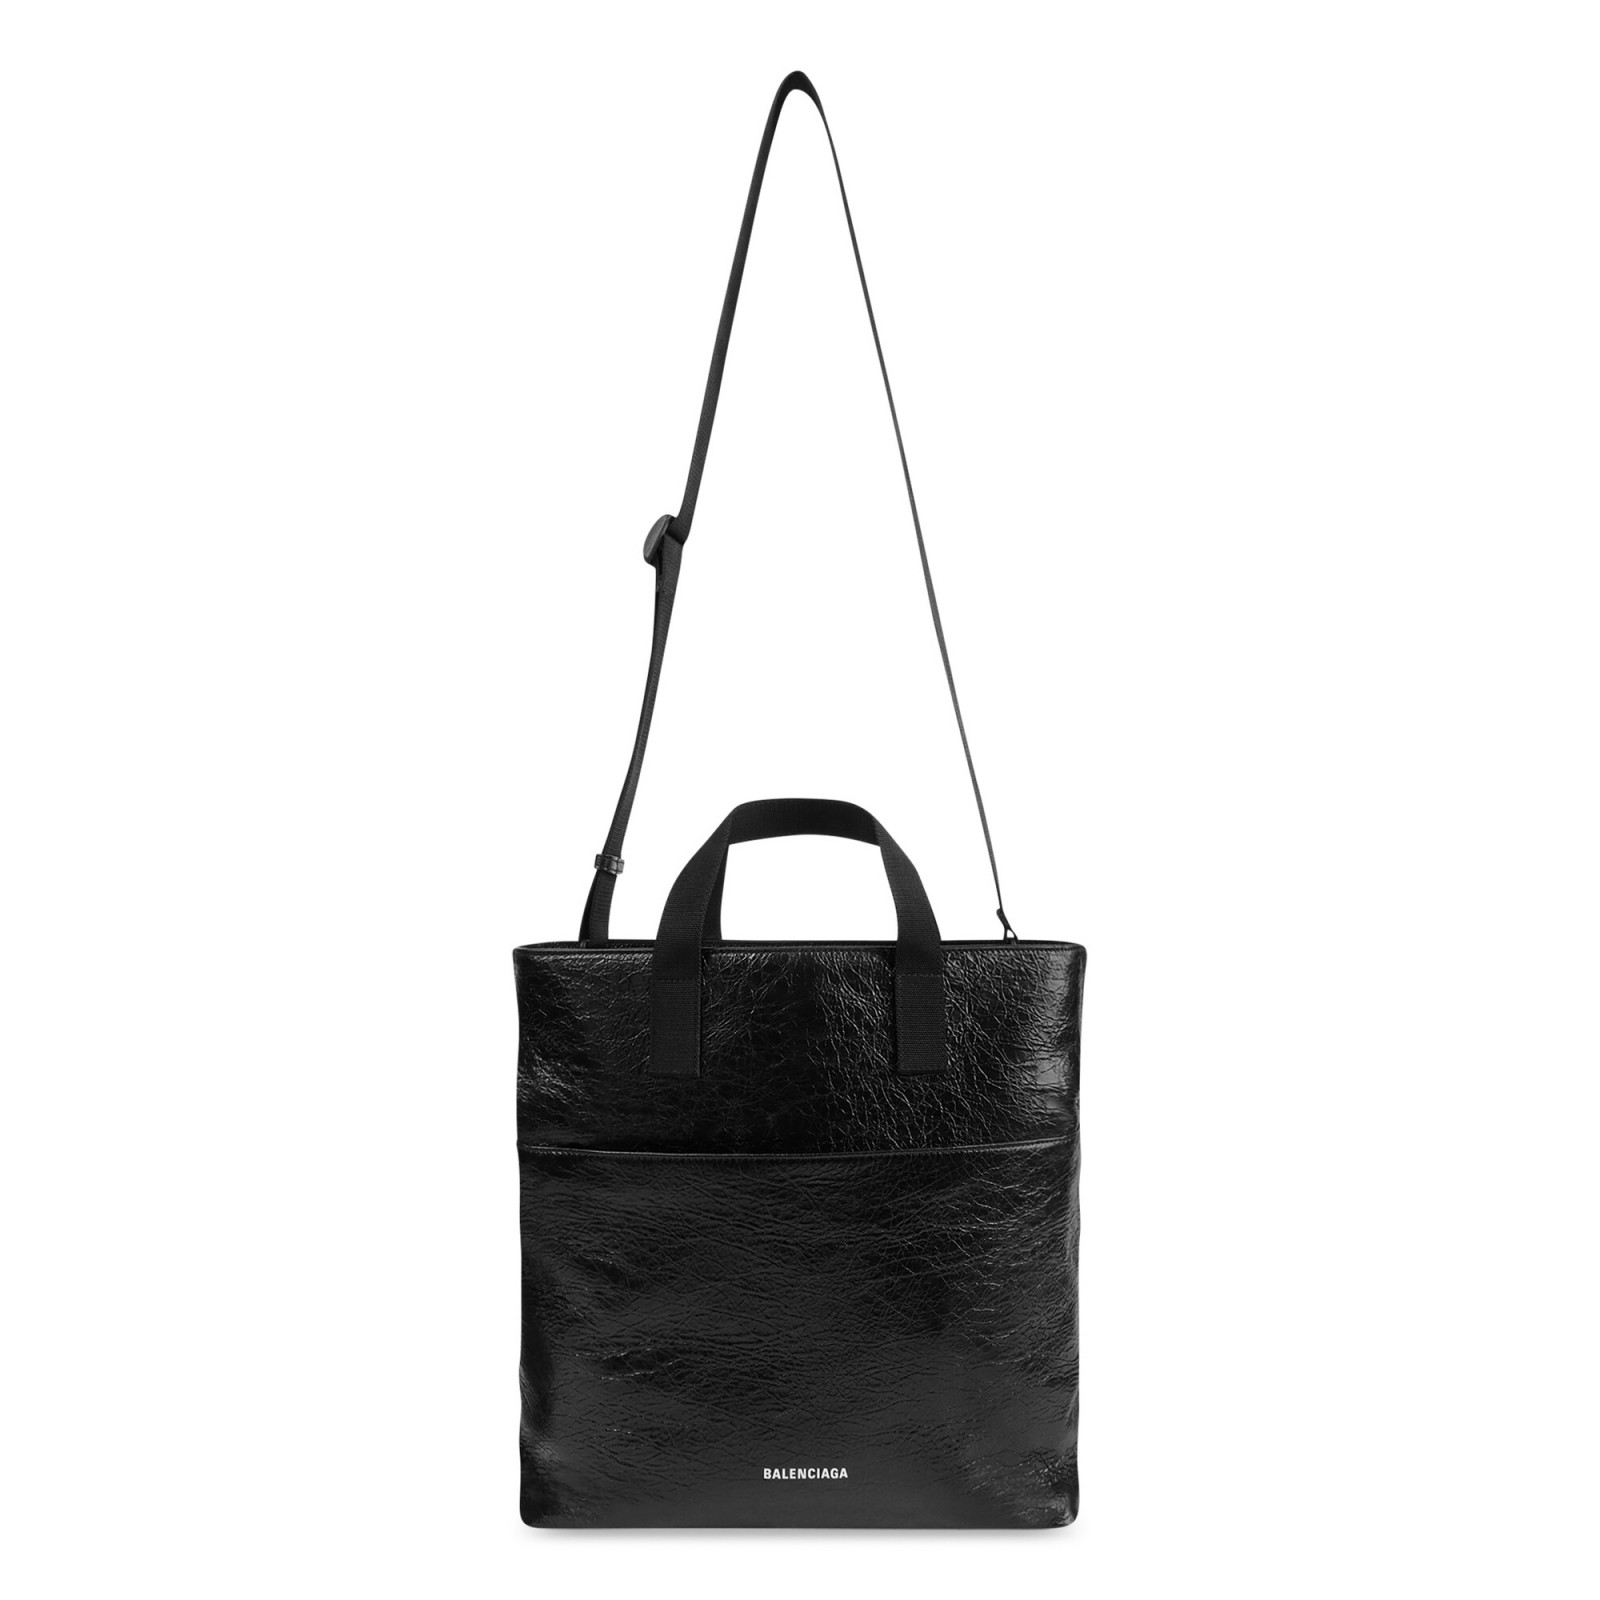 EXPLORER TOTE BAG WITH STRAP